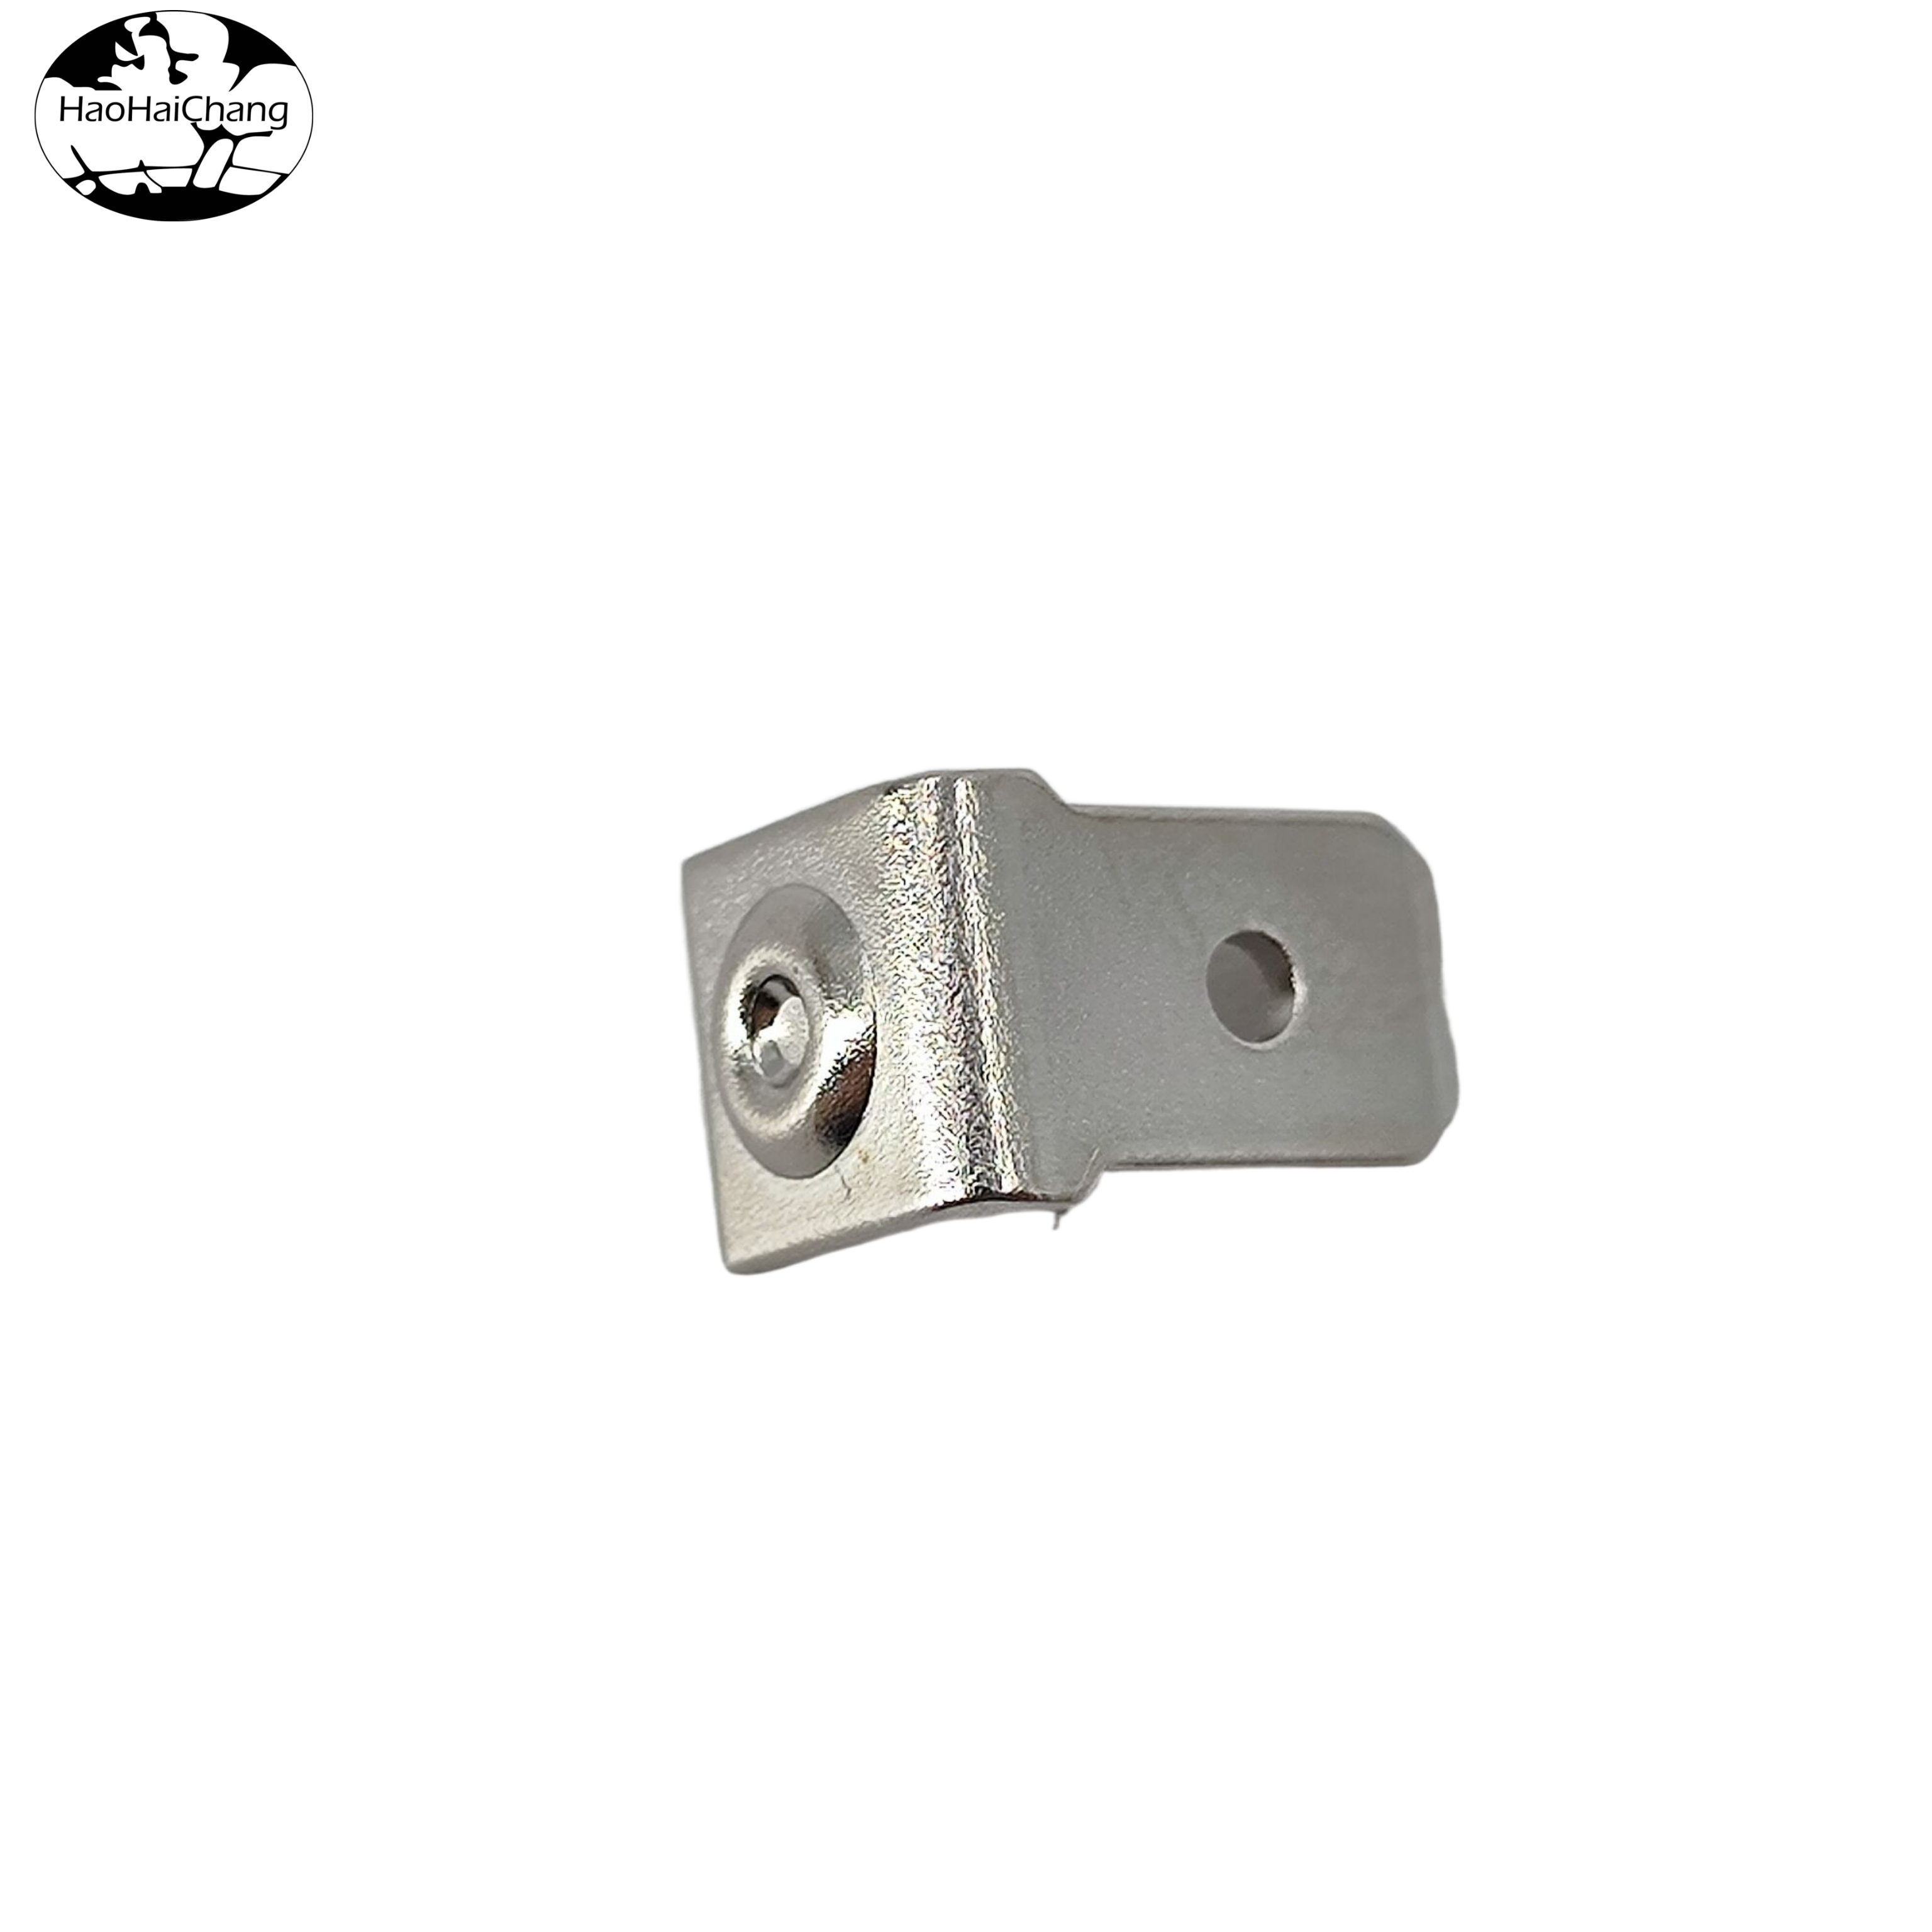 HHC-0157 Connector